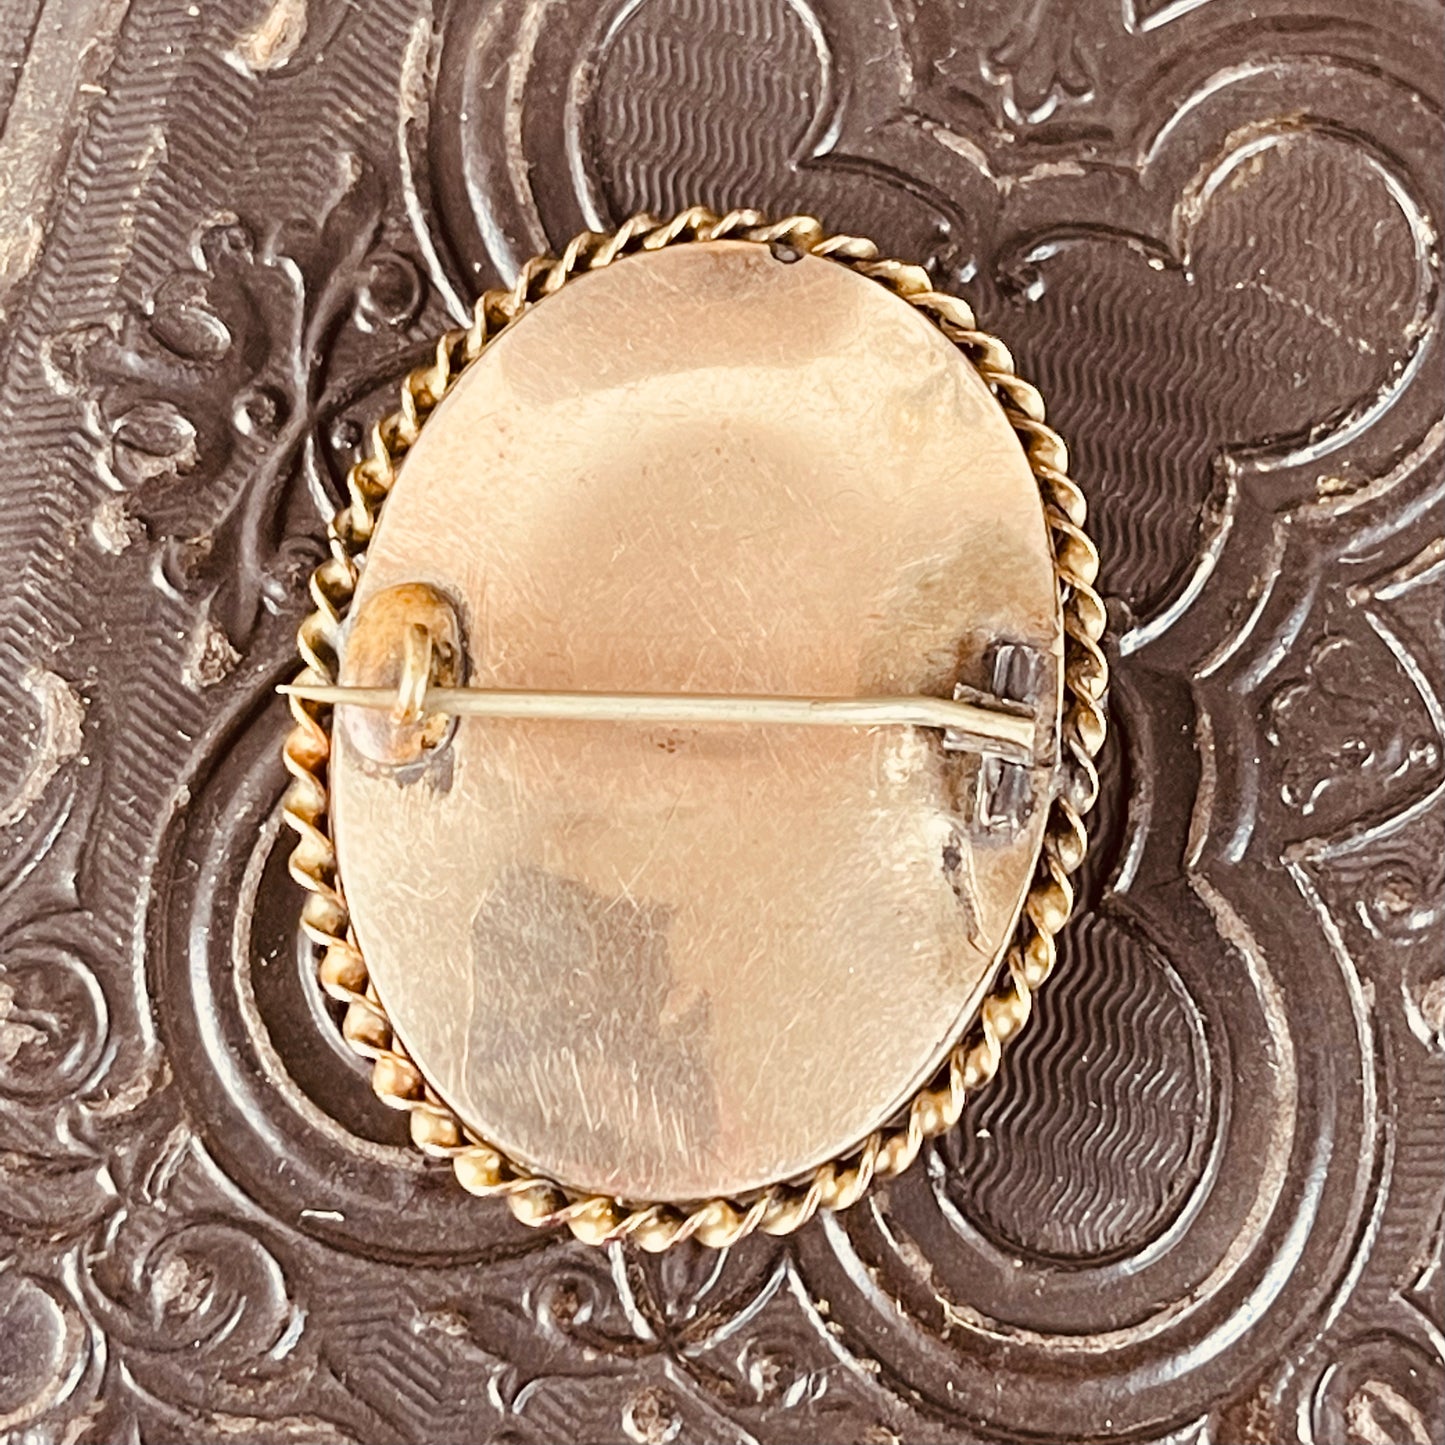 Victorian Mourning Gold Filled Hairwork Brooch